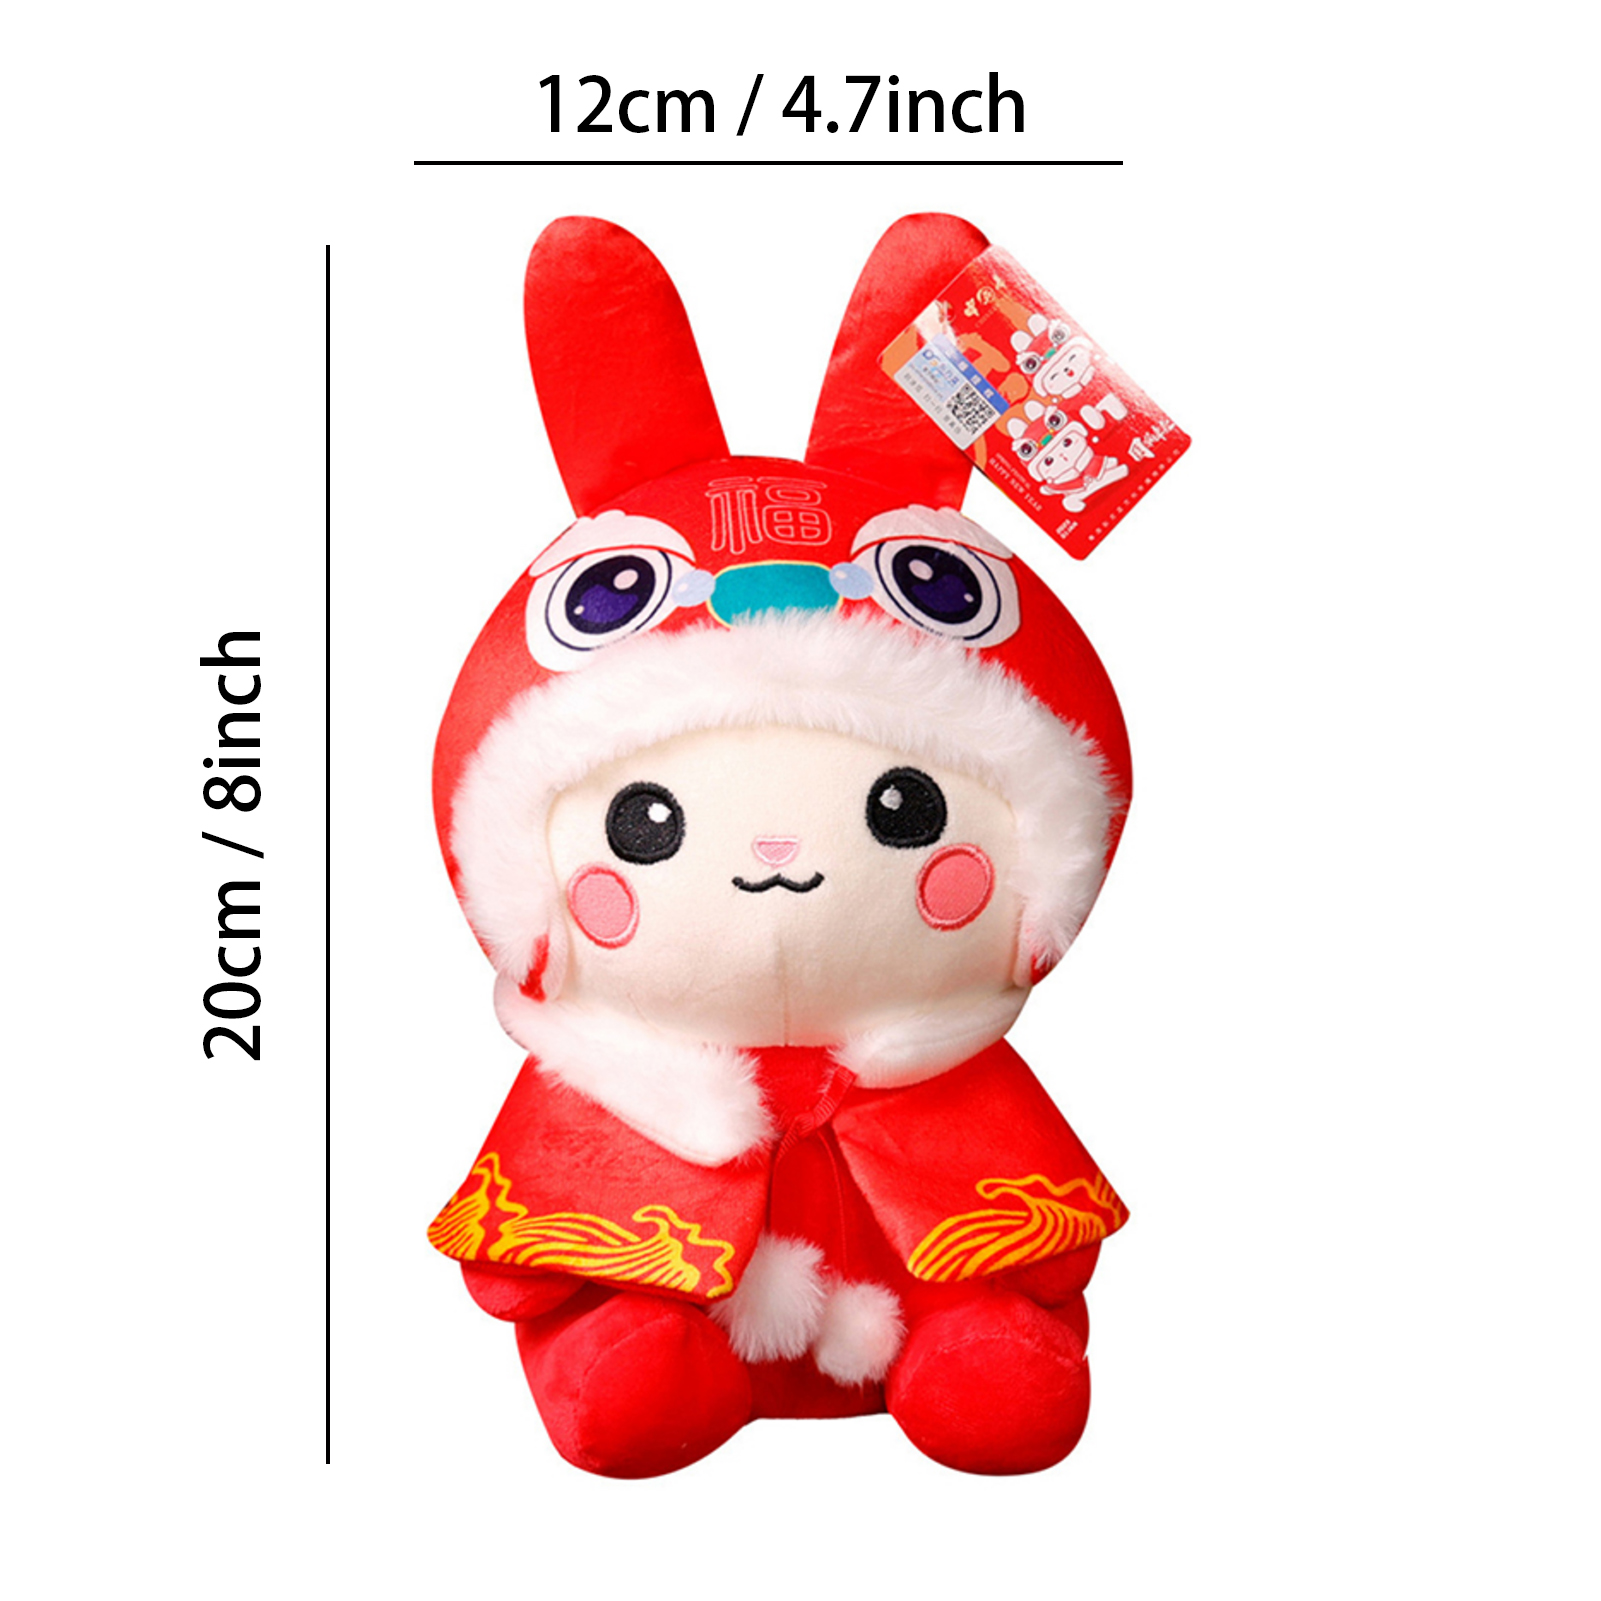 Cute and Safe chinese new year plush toy, Perfect for Gifting 